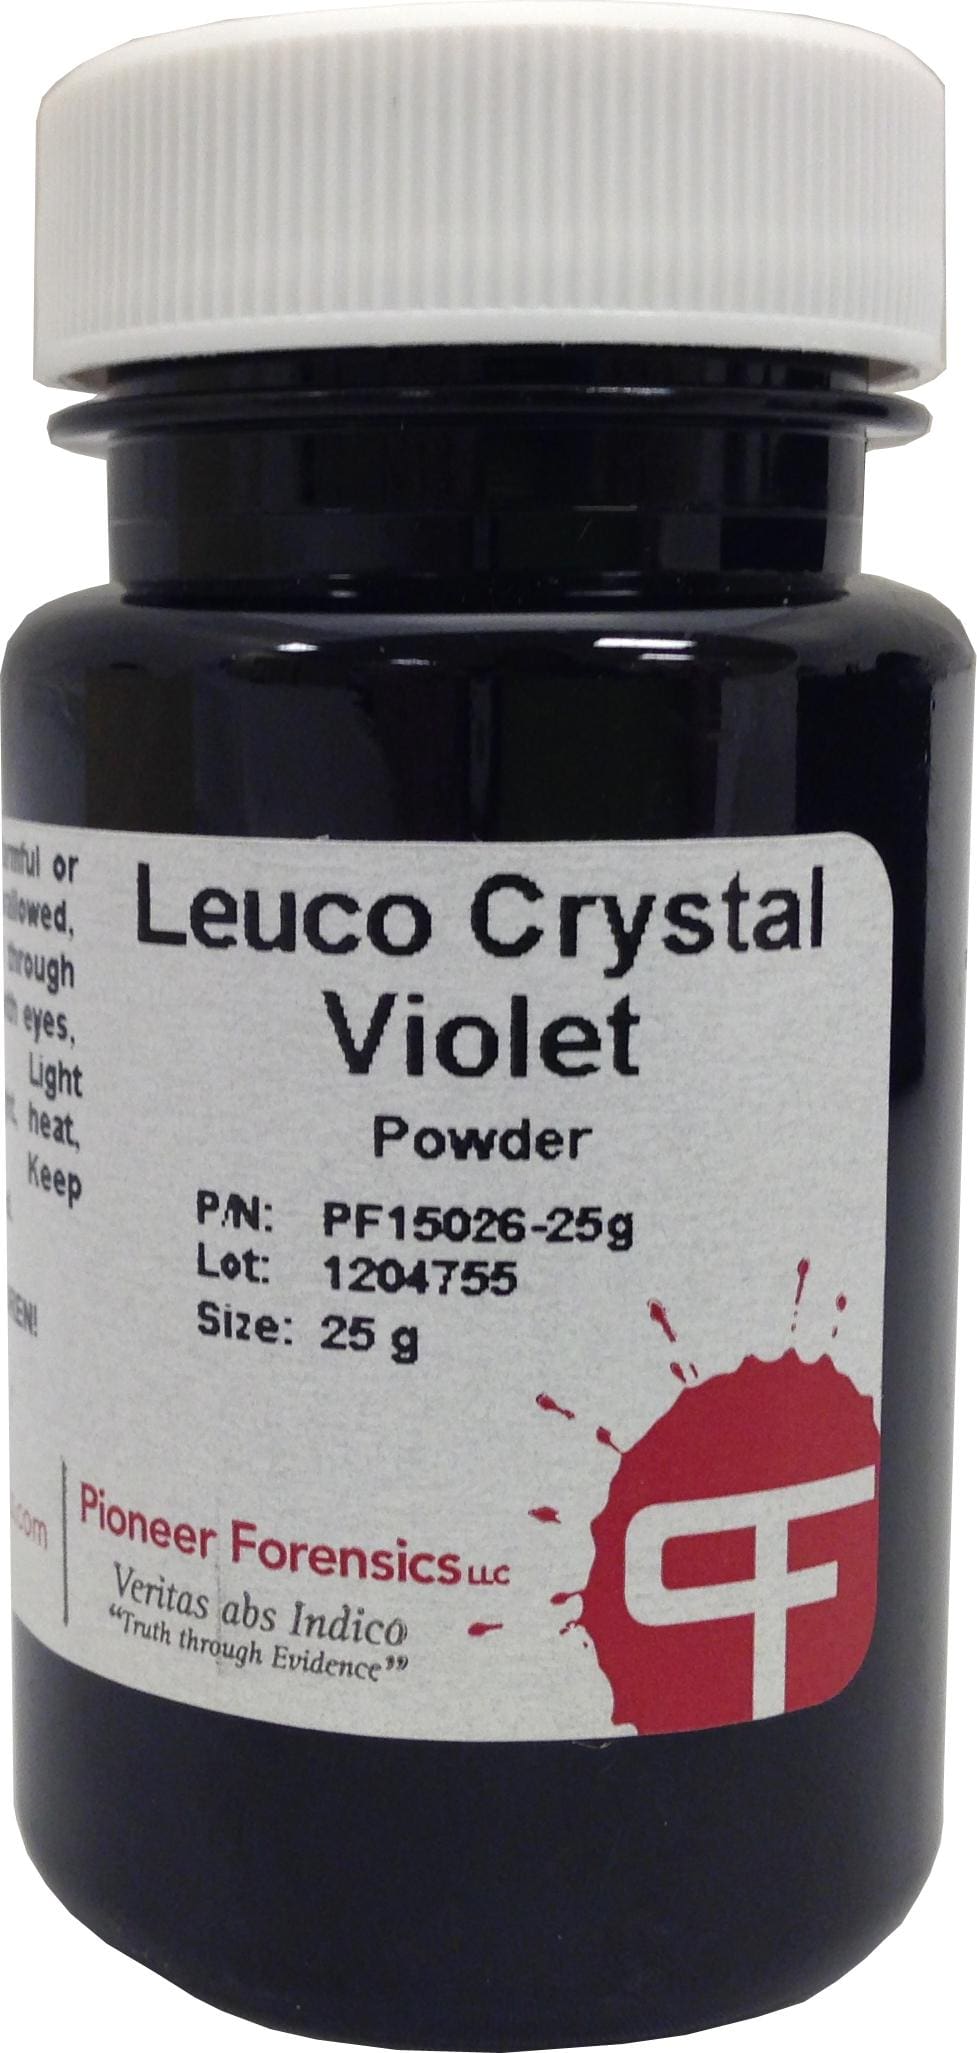 Leucocrystal Violet reacts with the heme-group in blood to give a violet color.